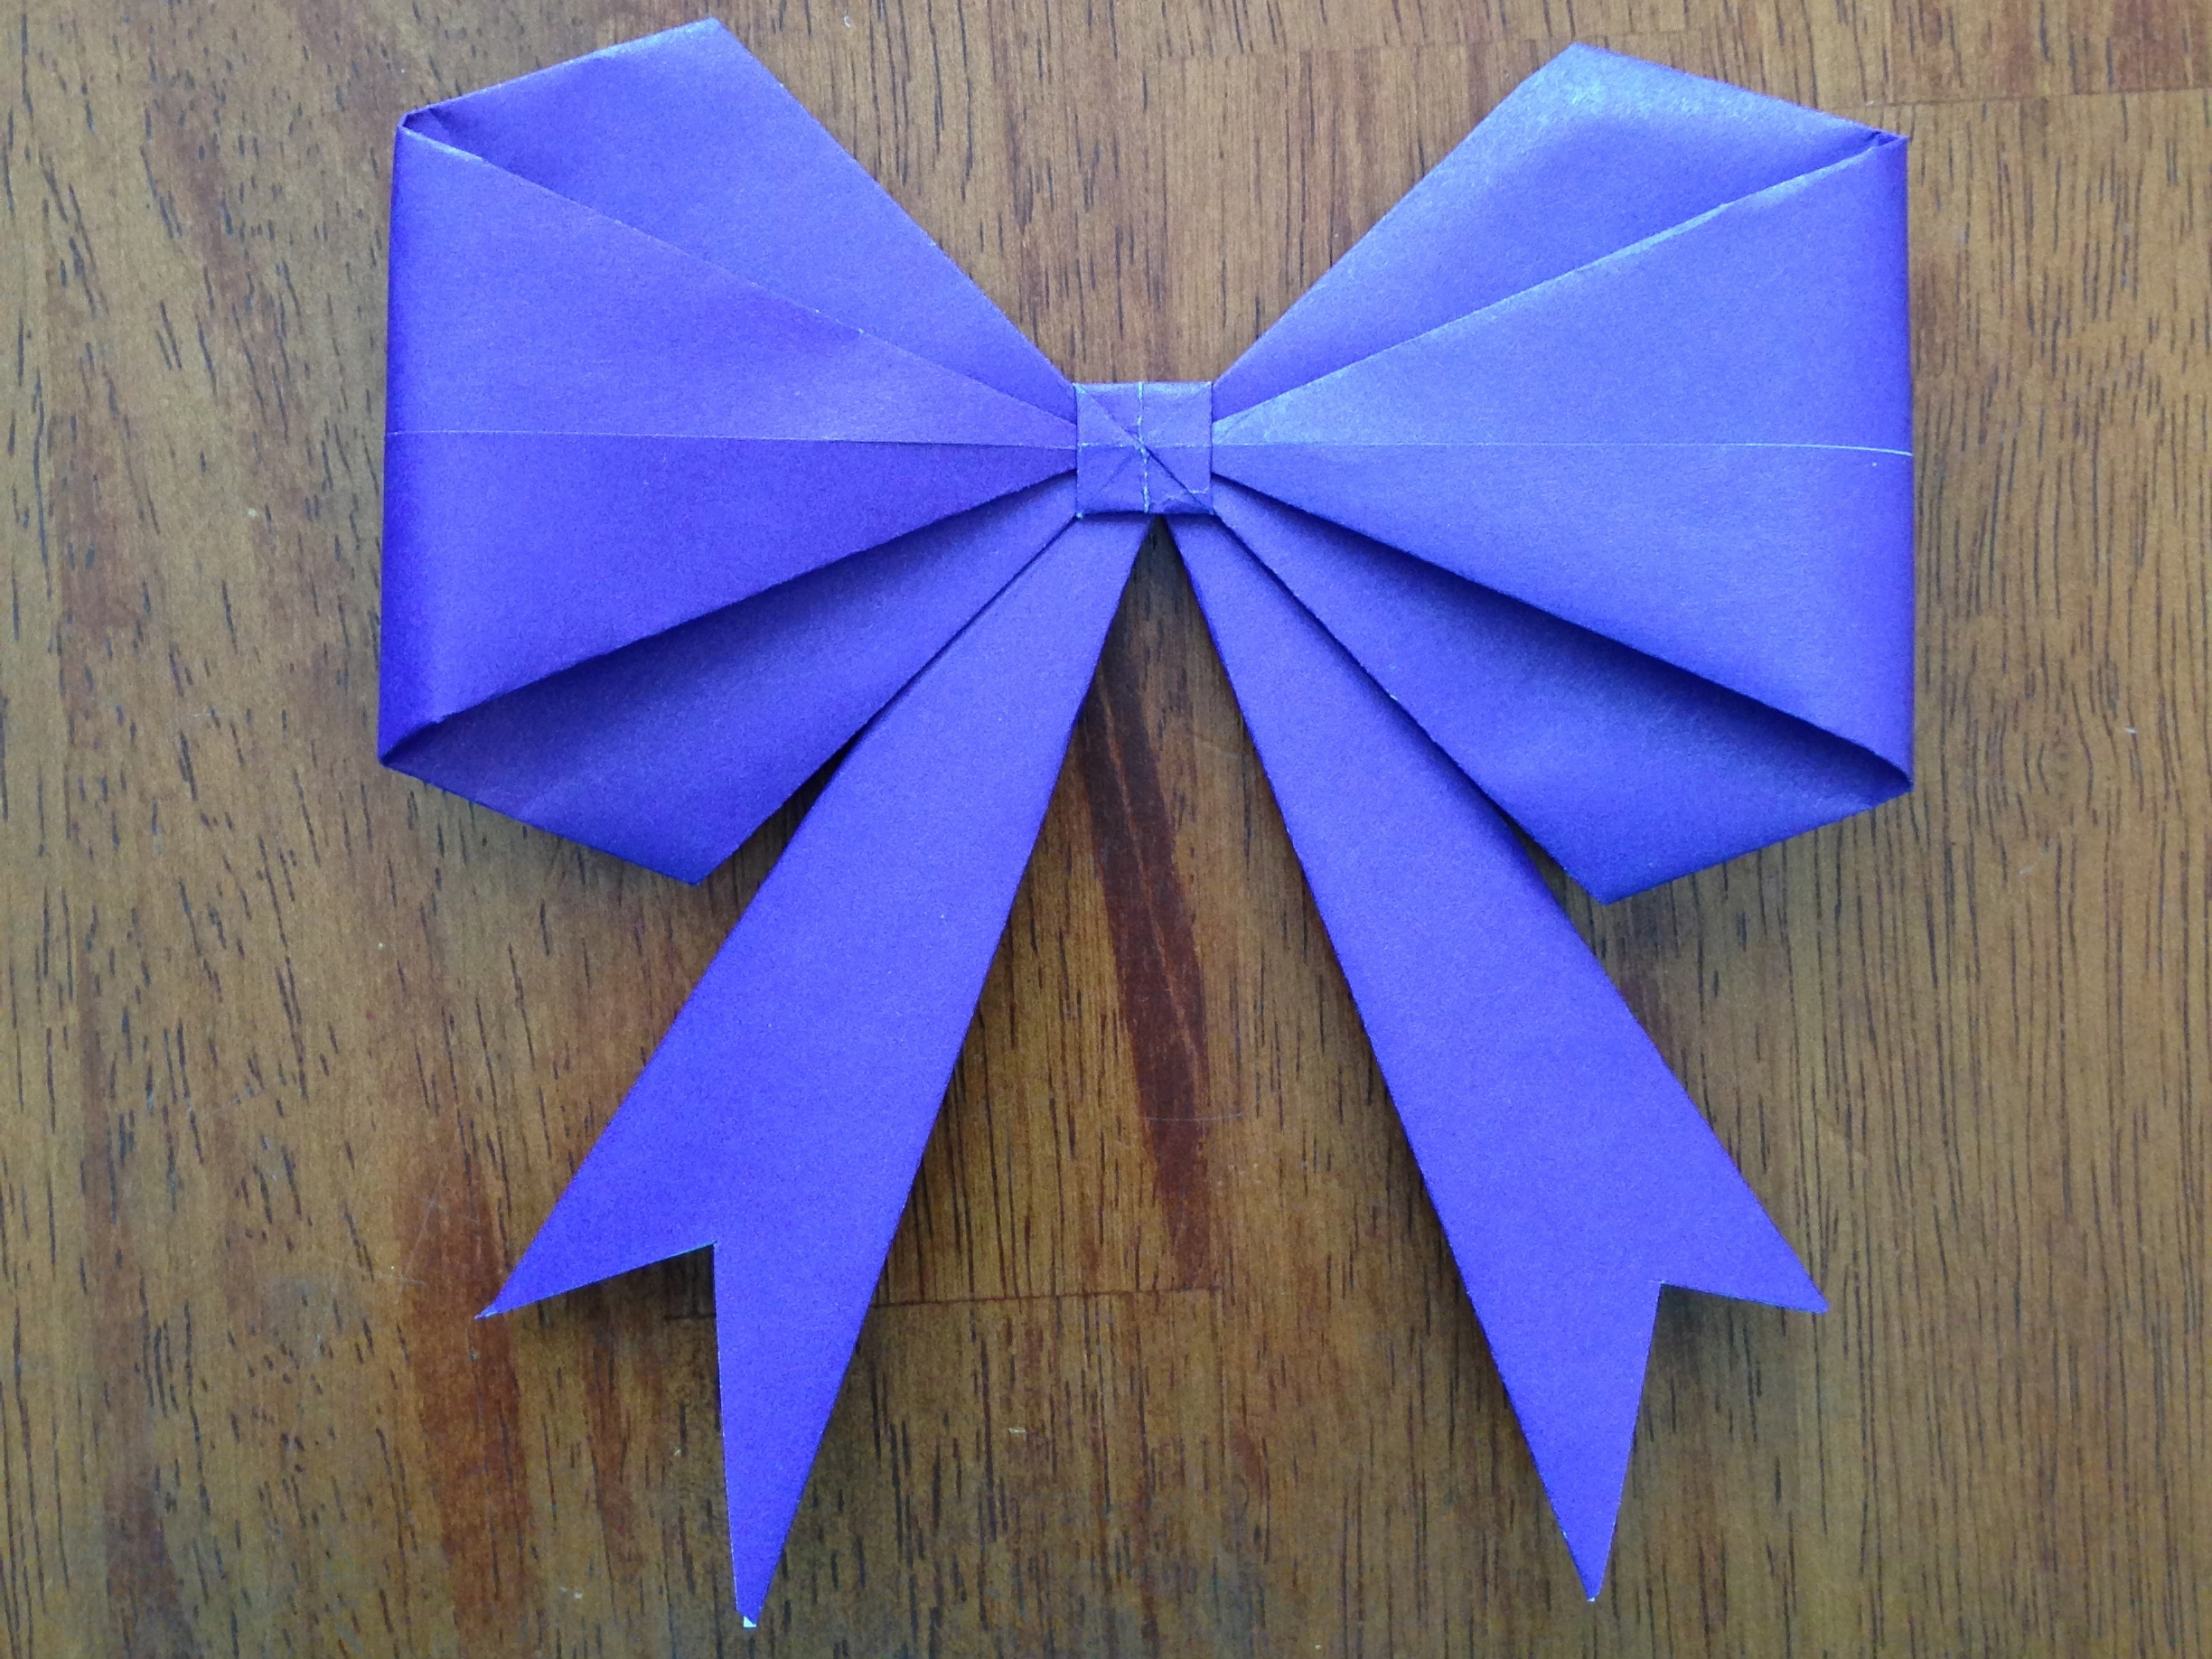 How To Make An Origami Origami Bow Make